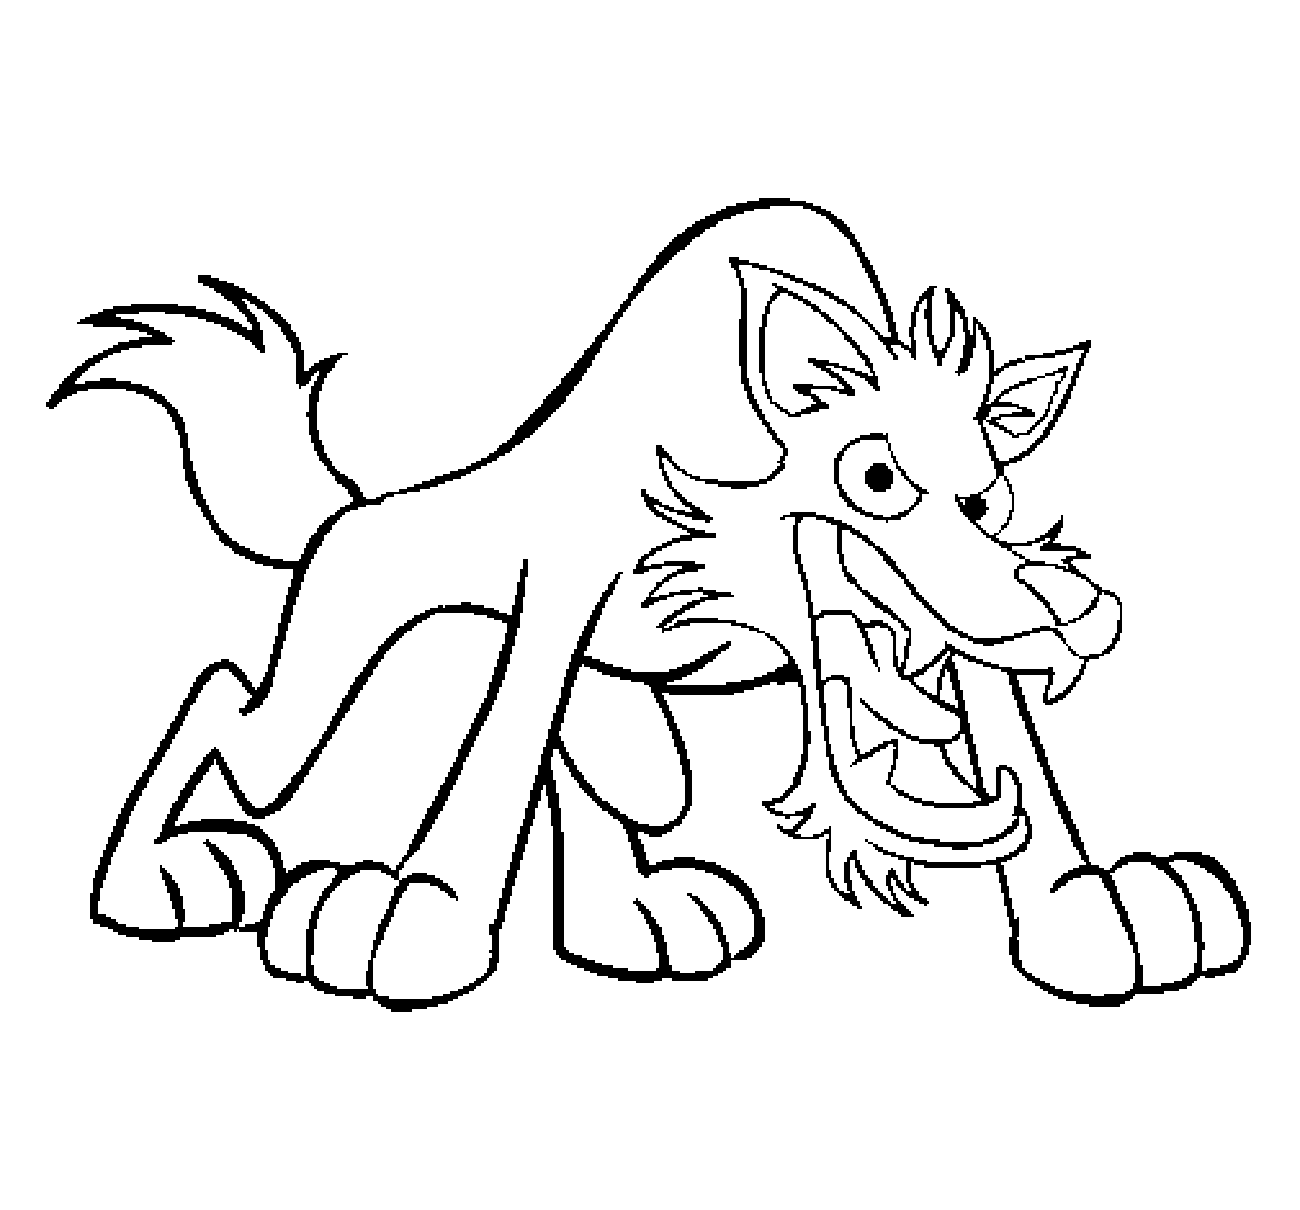 Funny free Wolf coloring page to print and color